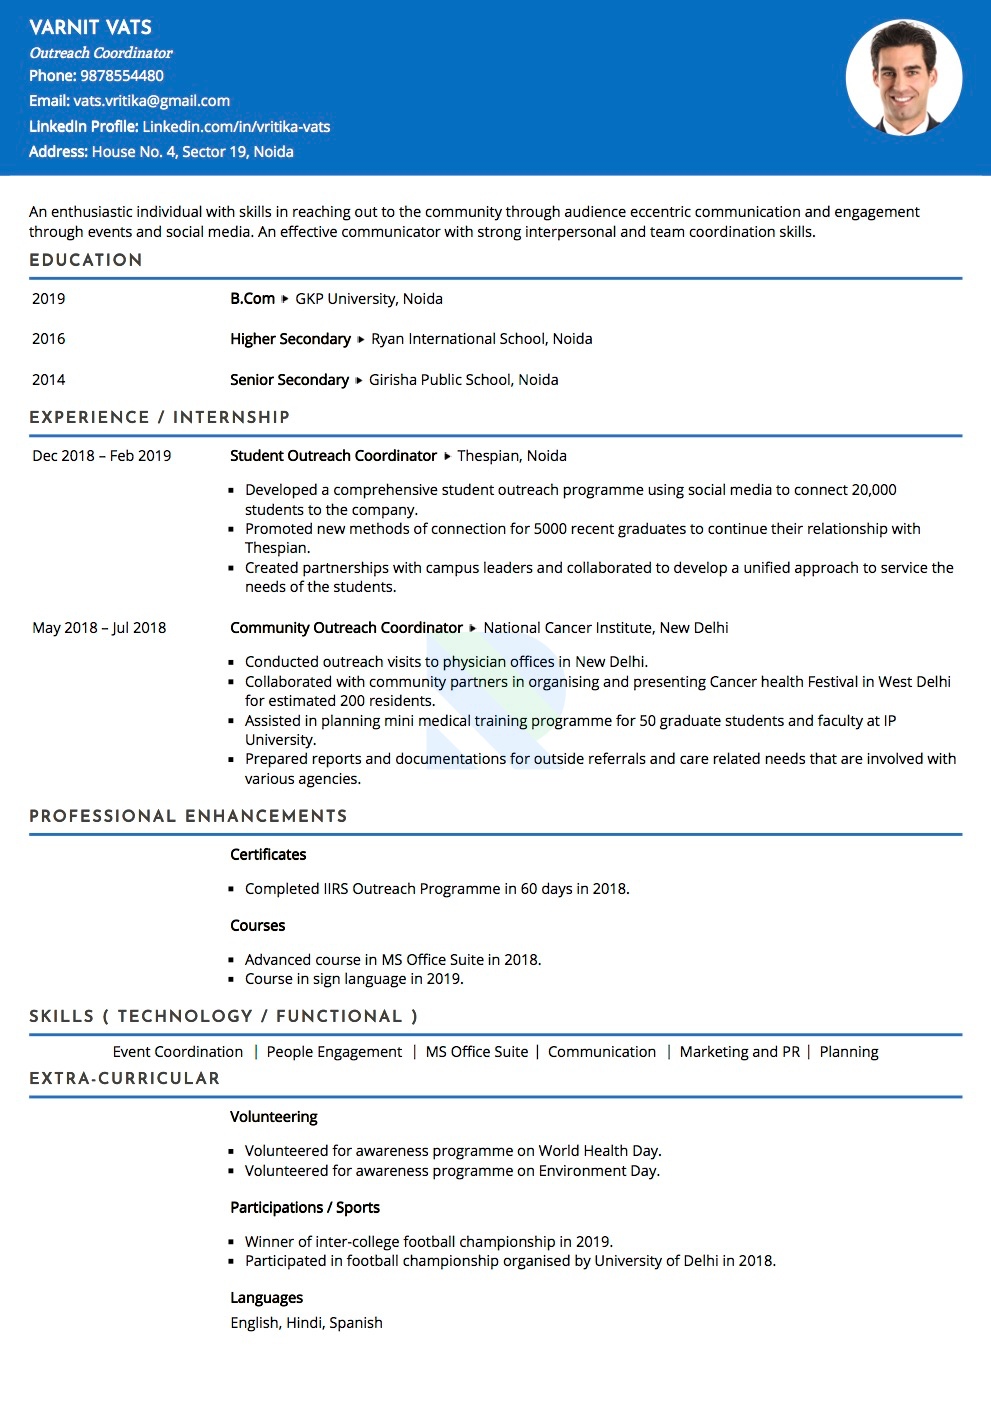 Sample Resume of Outreach Coordinator | Free Resume Templates & Samples on Resumod.co